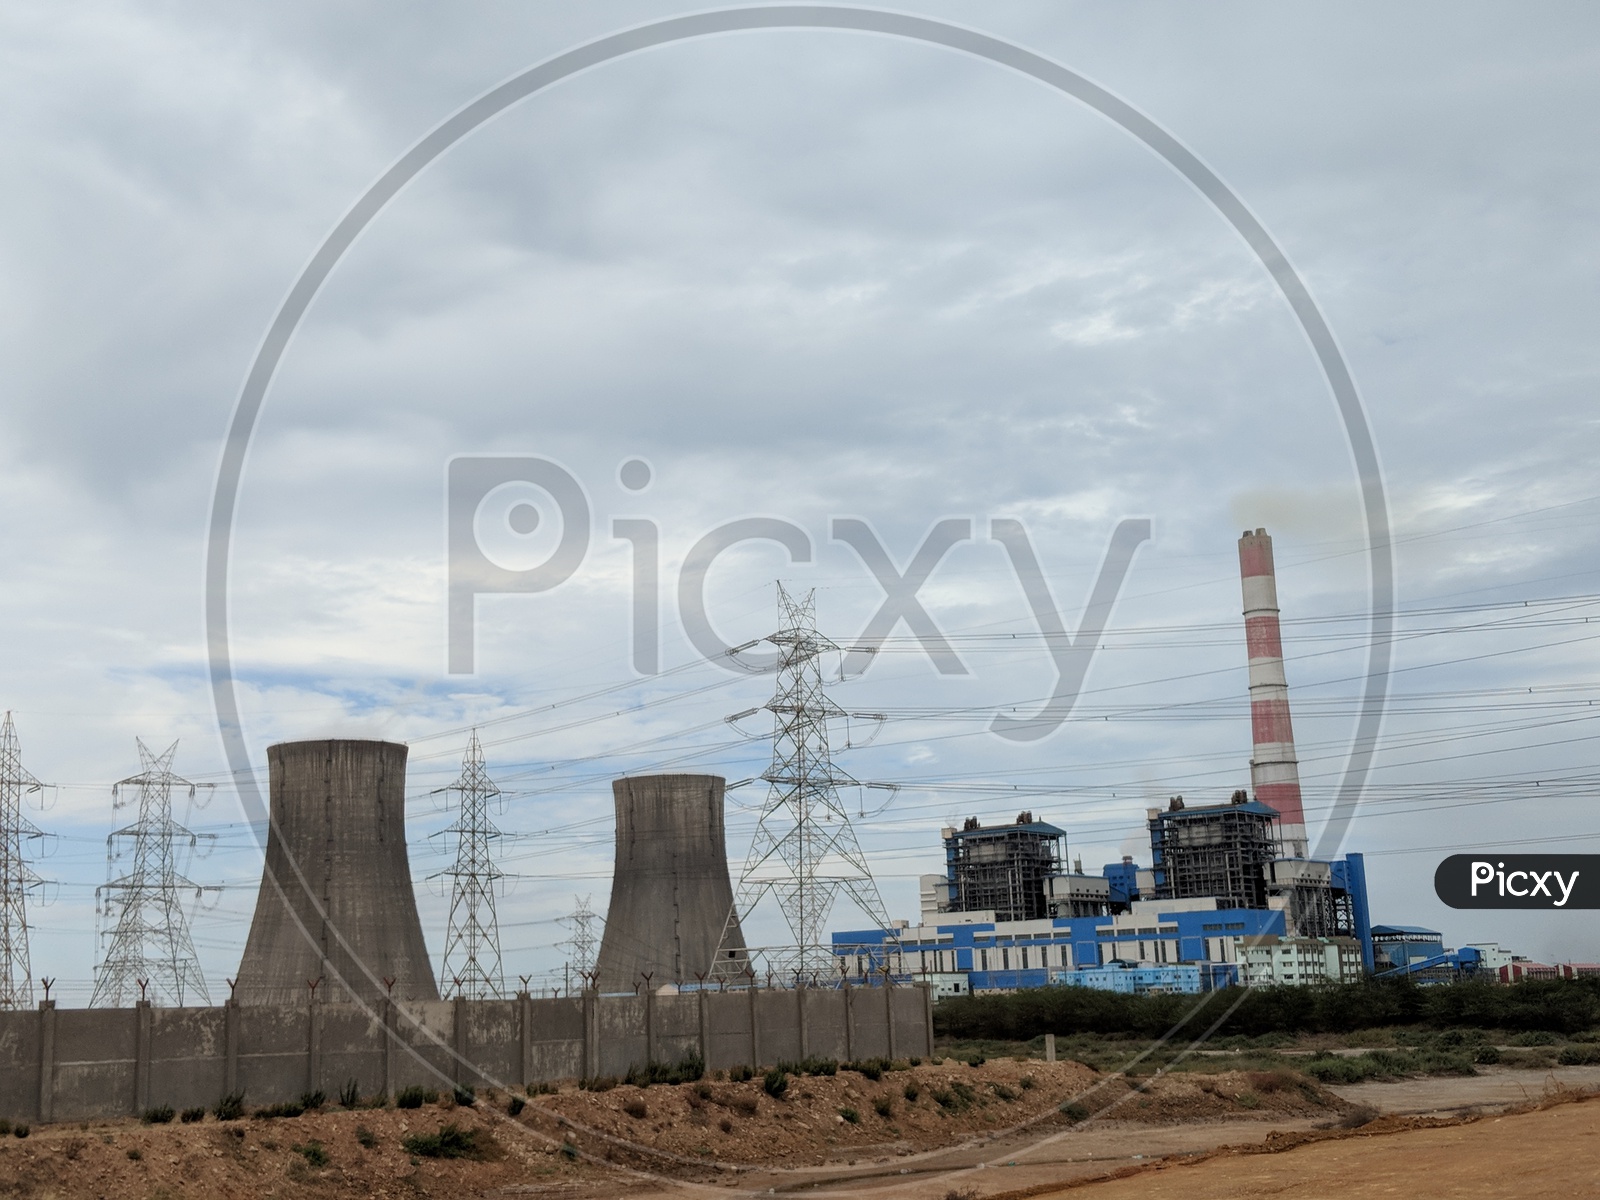 Thermal Power Generation